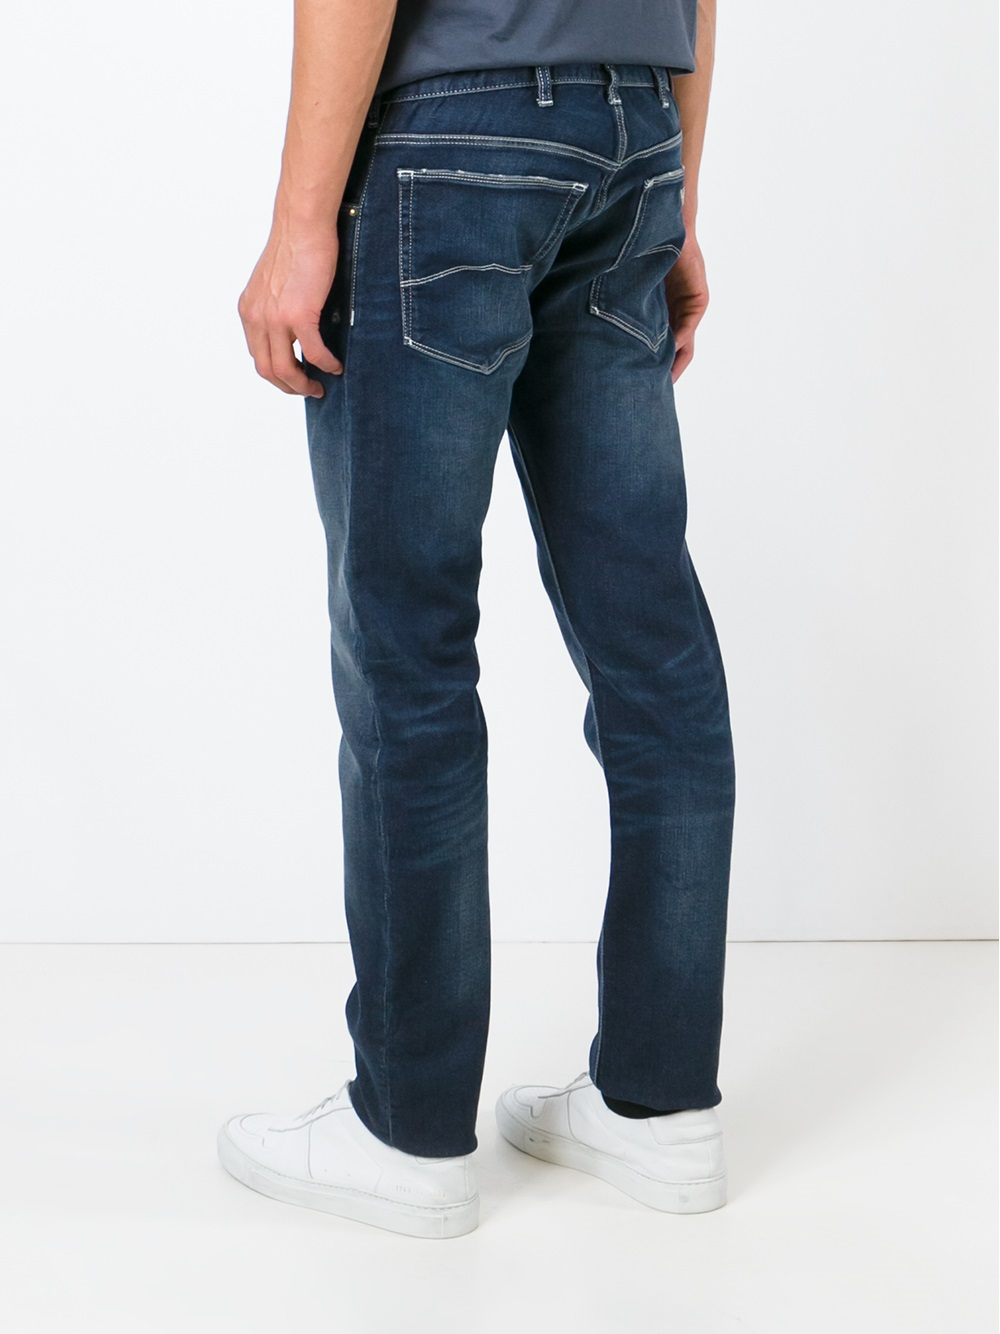 Armani Jeans Jeans With White Stitching in Blue for Men | Lyst